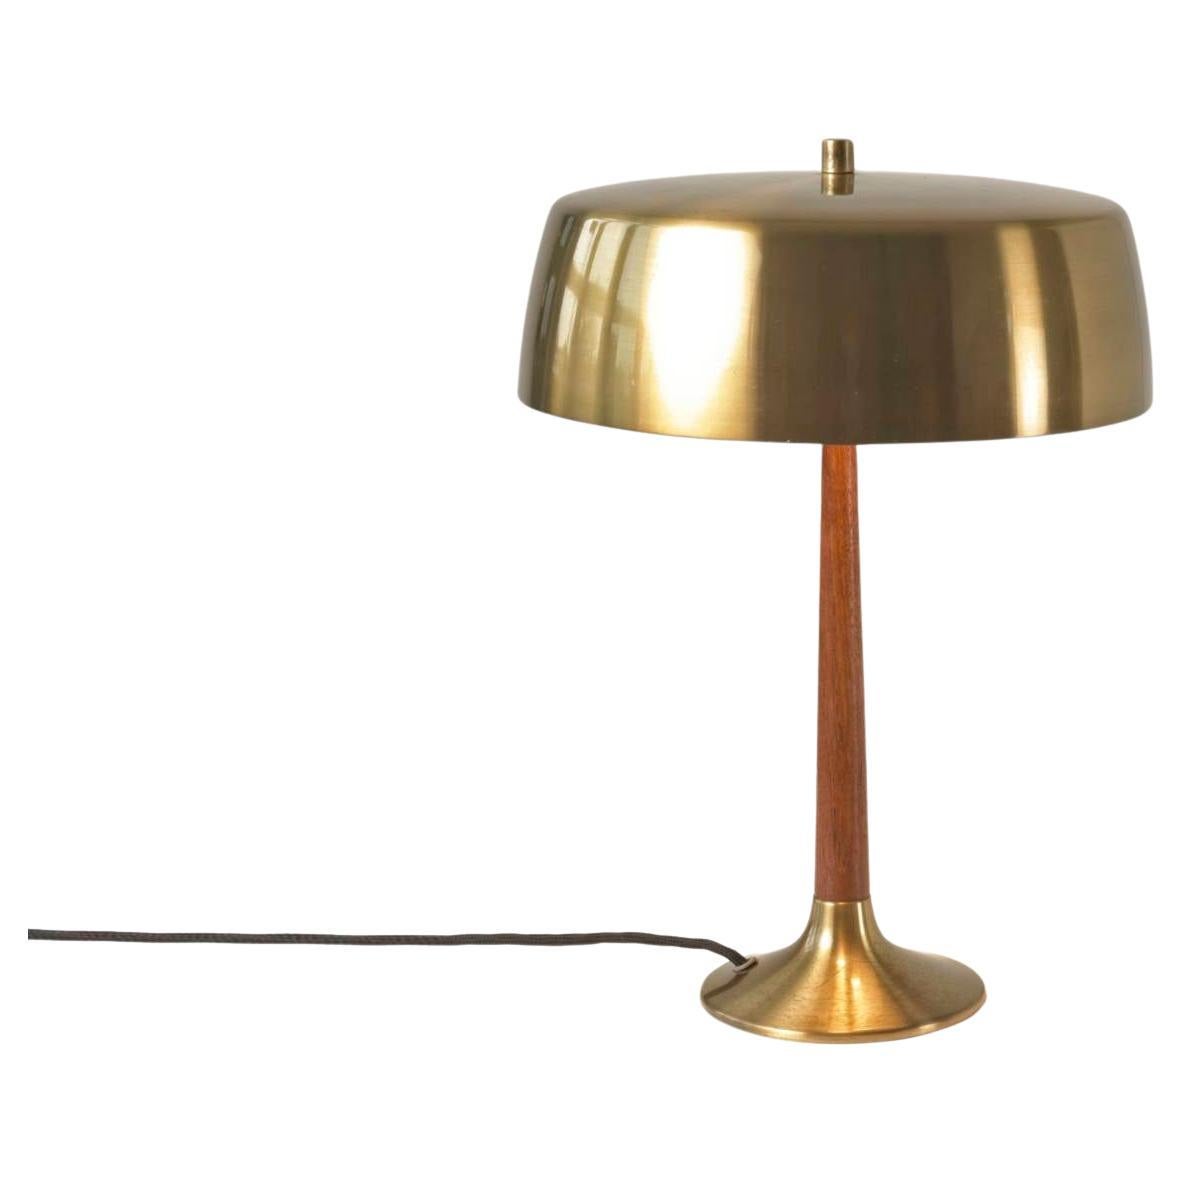 Table Lamp 41101 by Svend Aage Holm-Sørensen in Brass and Teak, Denmark - 1965 For Sale